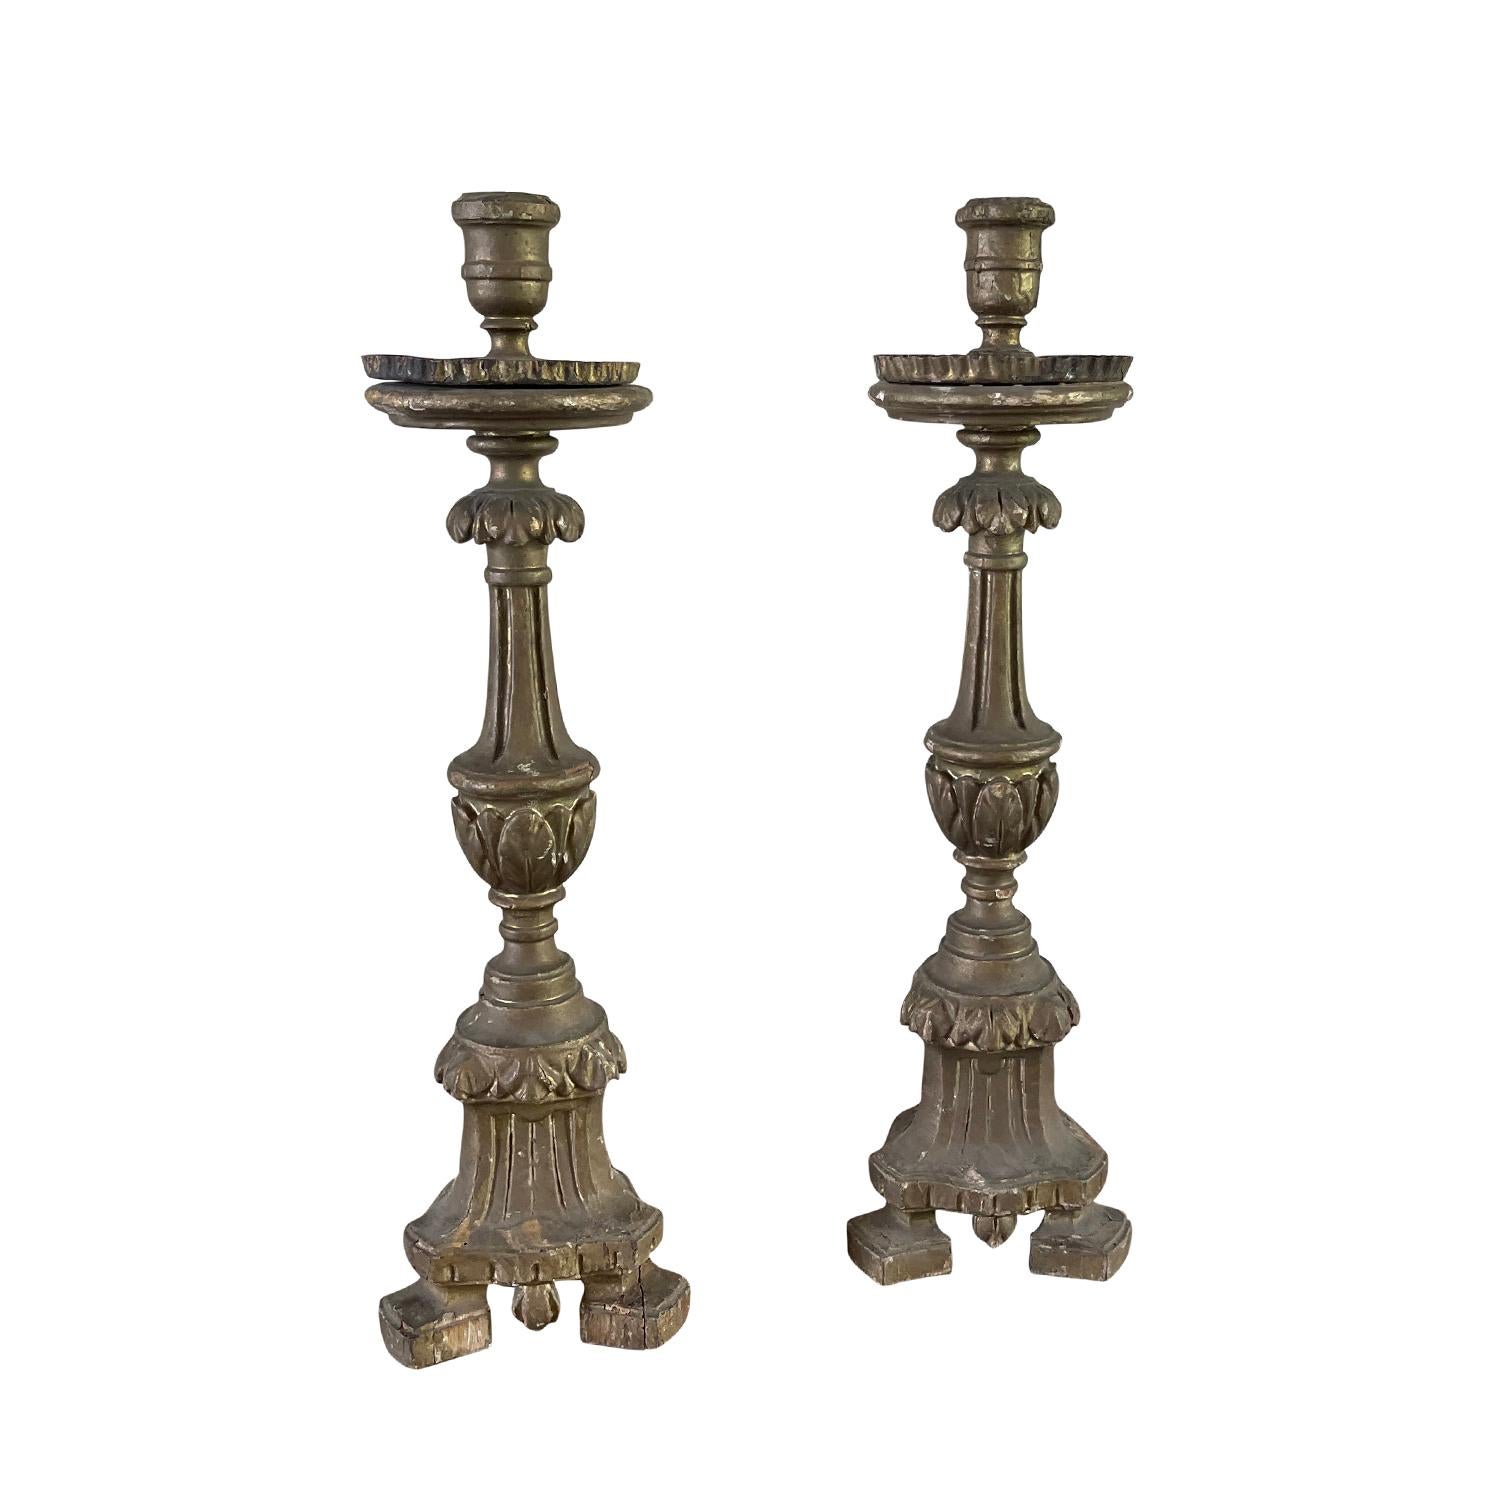 An antique French pair of mid 18th century candlesticks made of hand crafted Pinewood, in good condition. These candle holders feature a painted structure delicately on a tripod base. These décor pieces will bring an elegance to any table. Wear